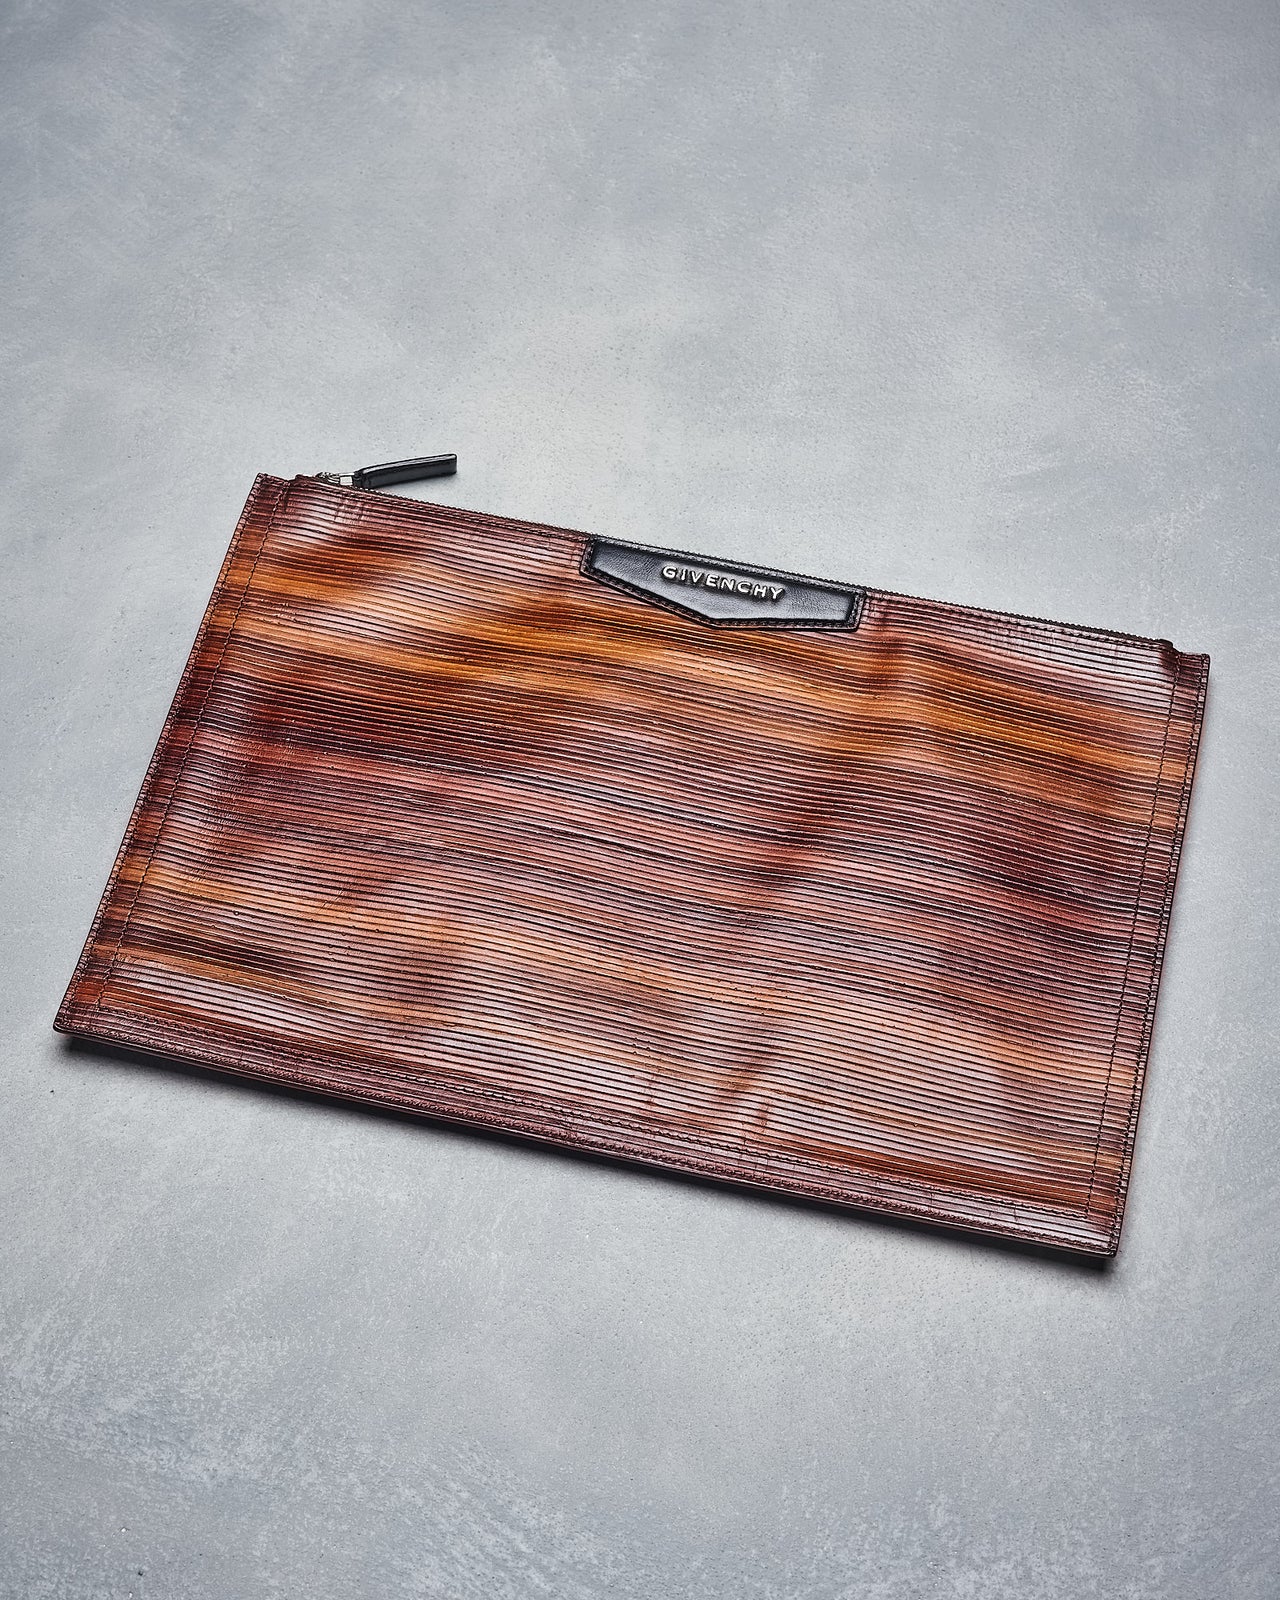 Givenchy Wood grain layered leather clutch